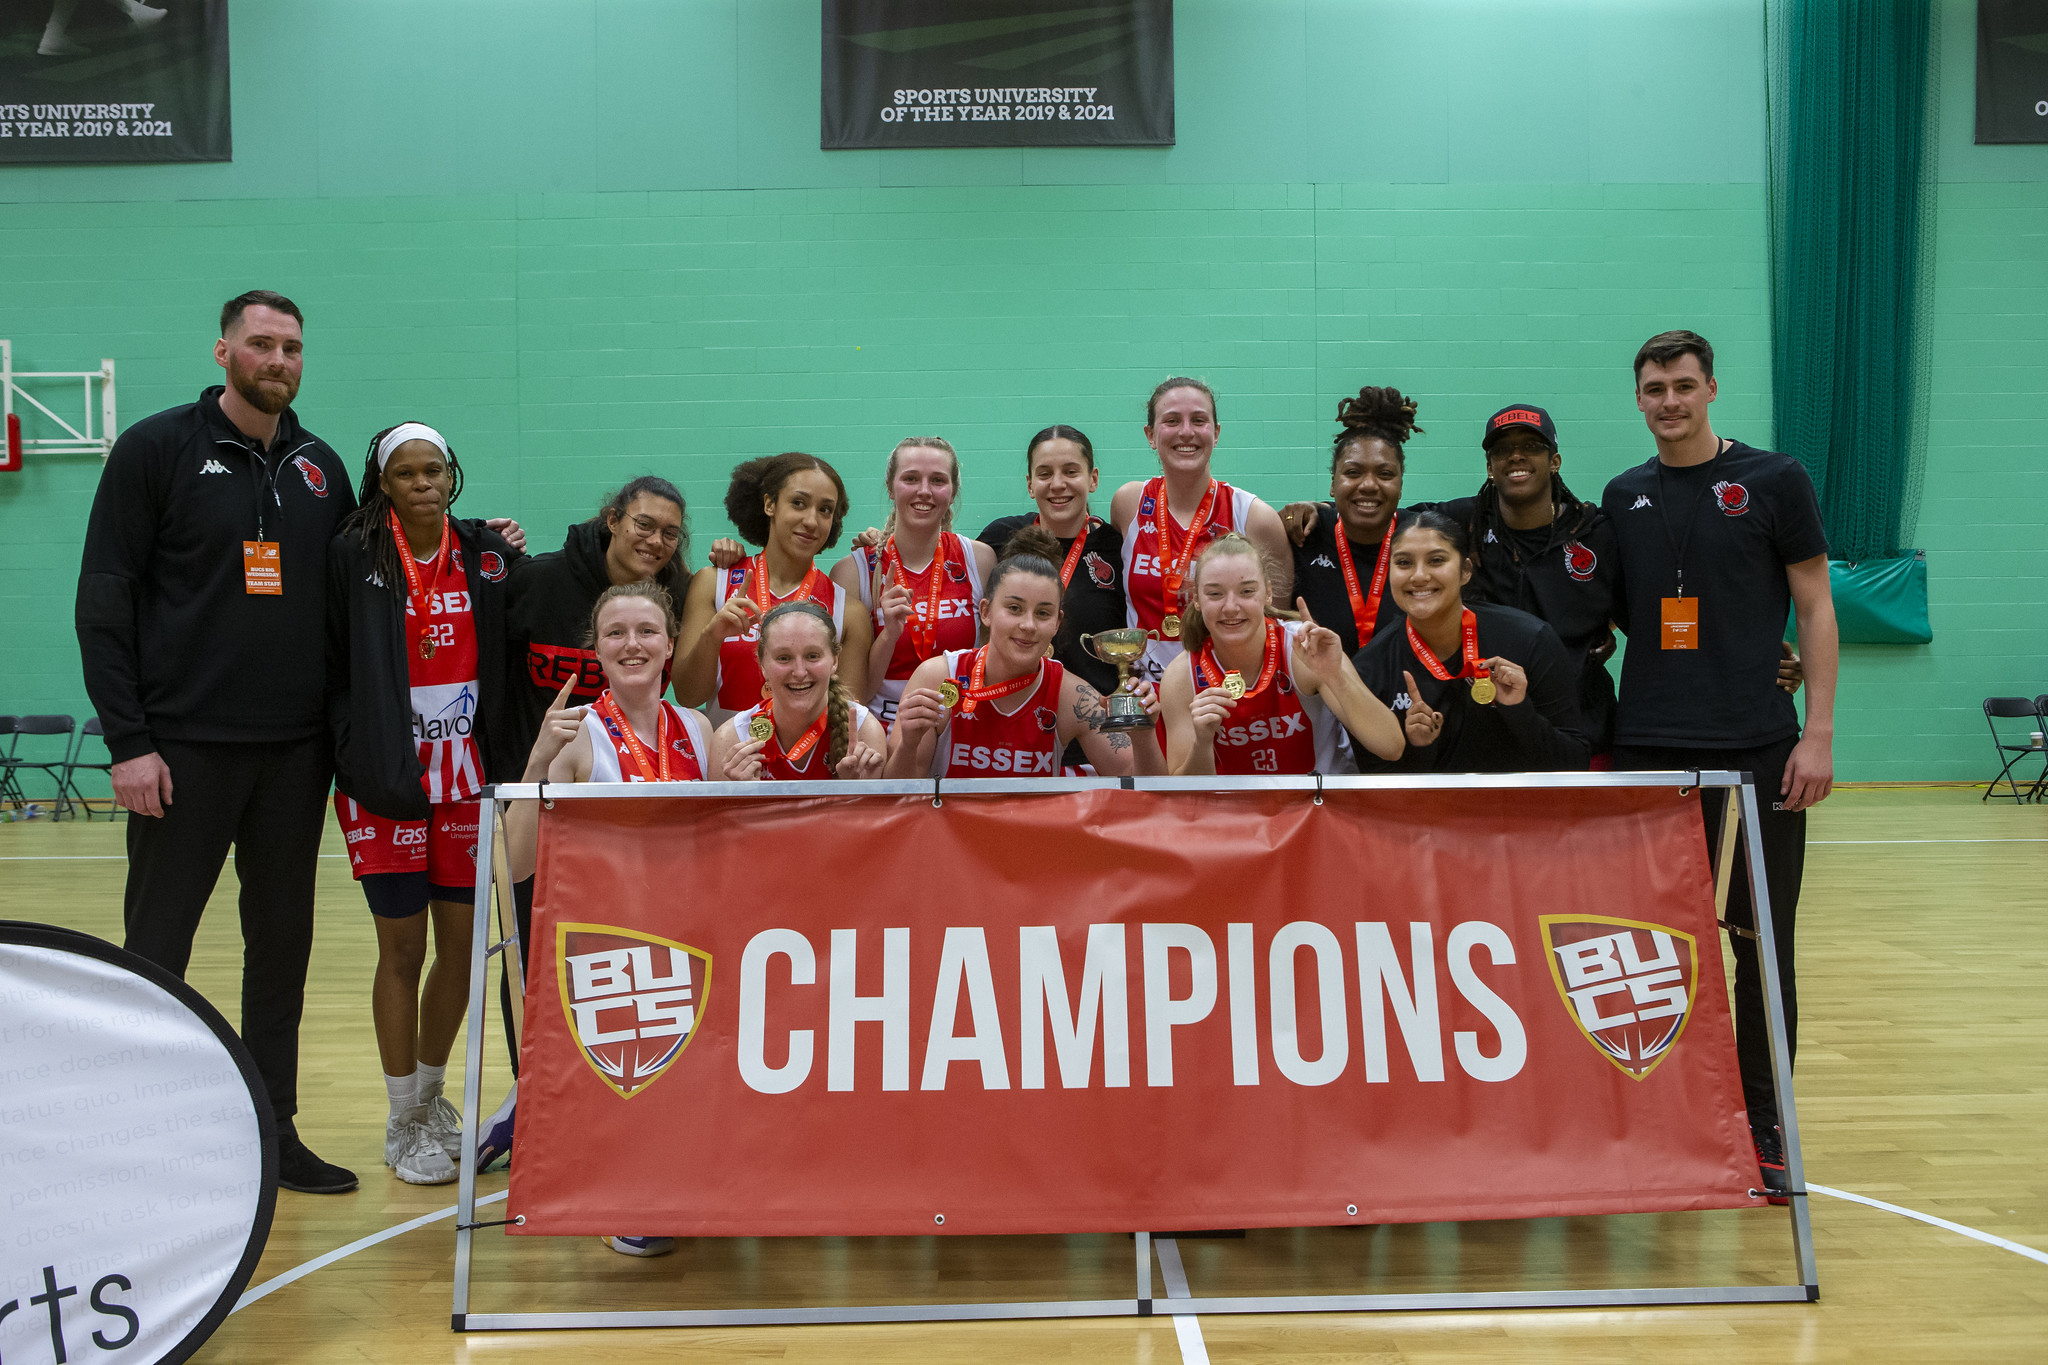 Basketball team net gold in dramatic national final